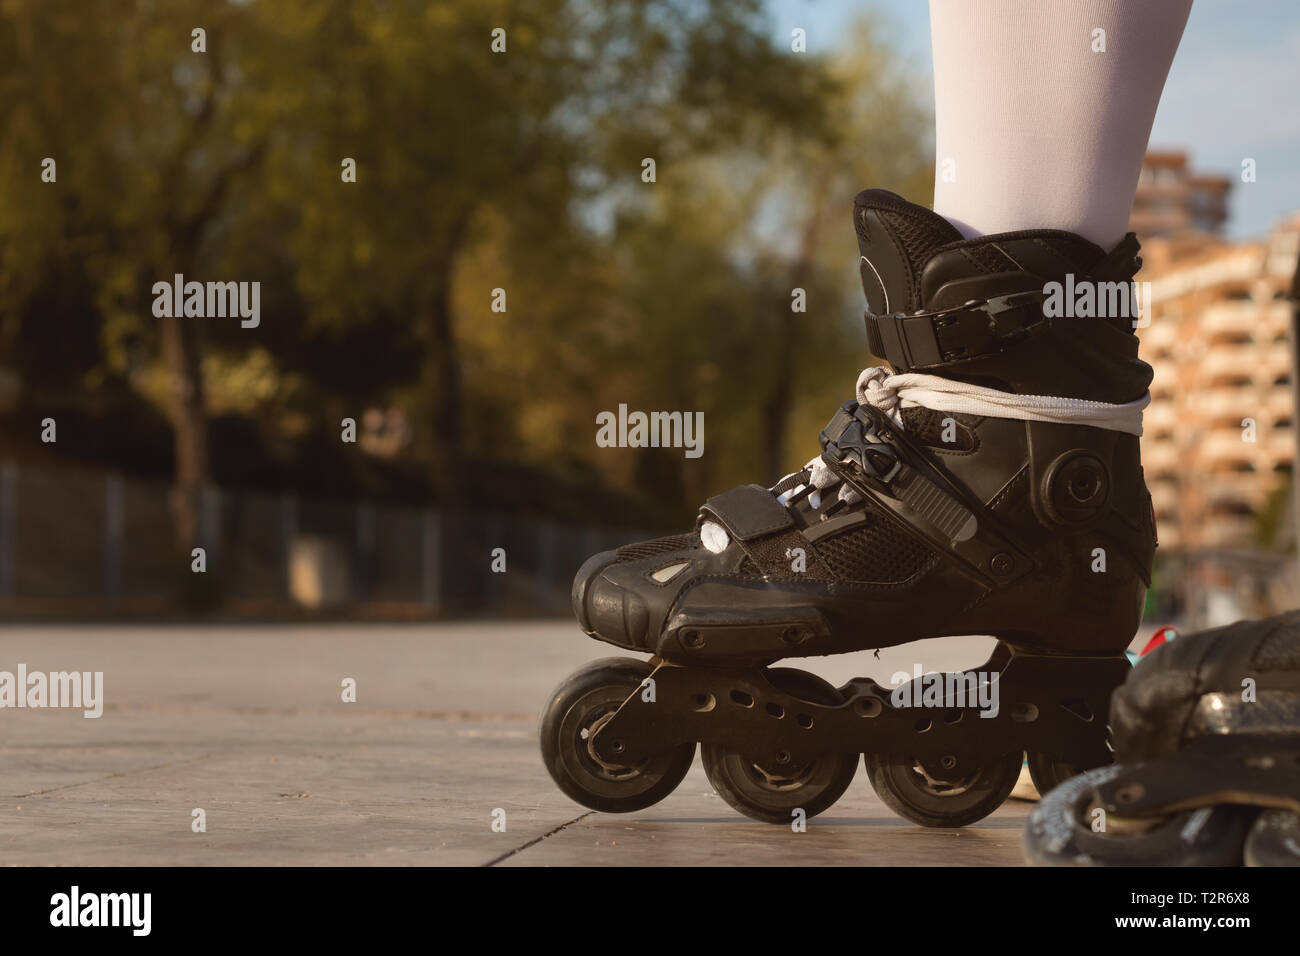 Close-up of black inline skates, overlooking a park out of focus in the background Stock Photo